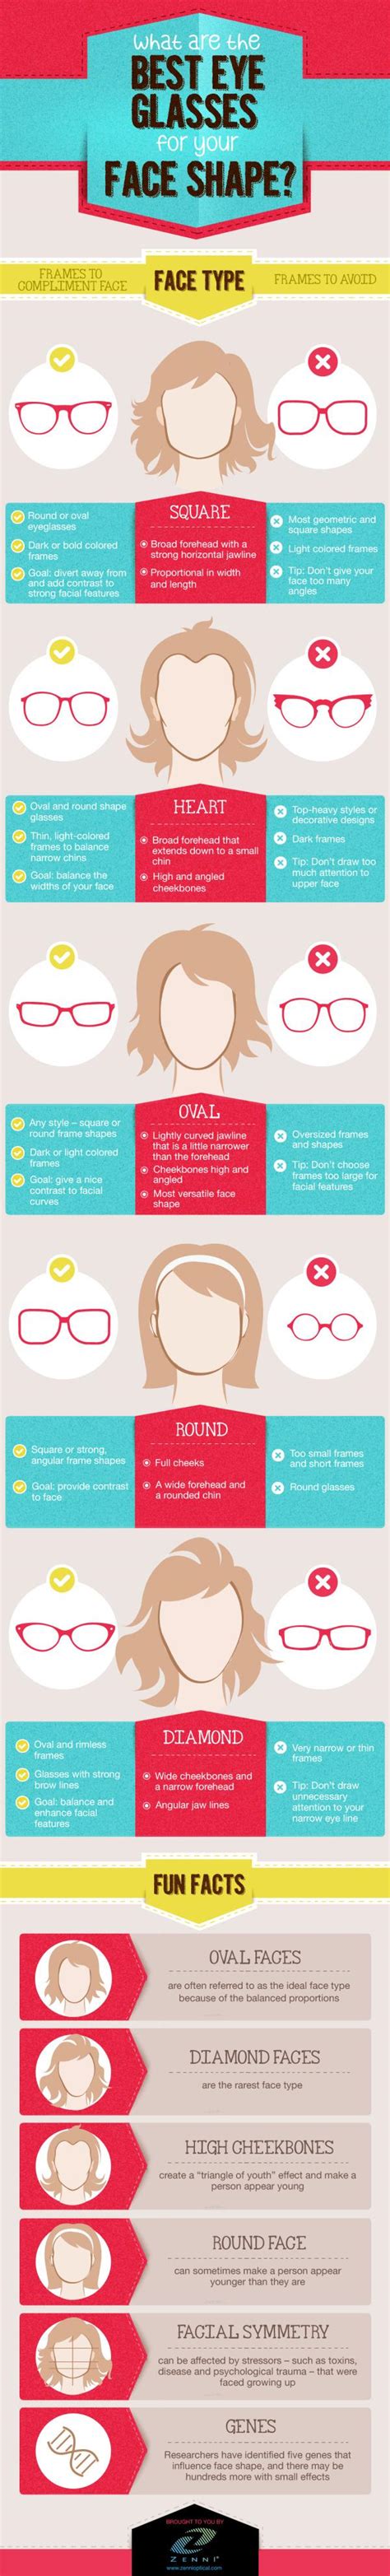 What Are The Best Eyeglasses For Your Face Shape